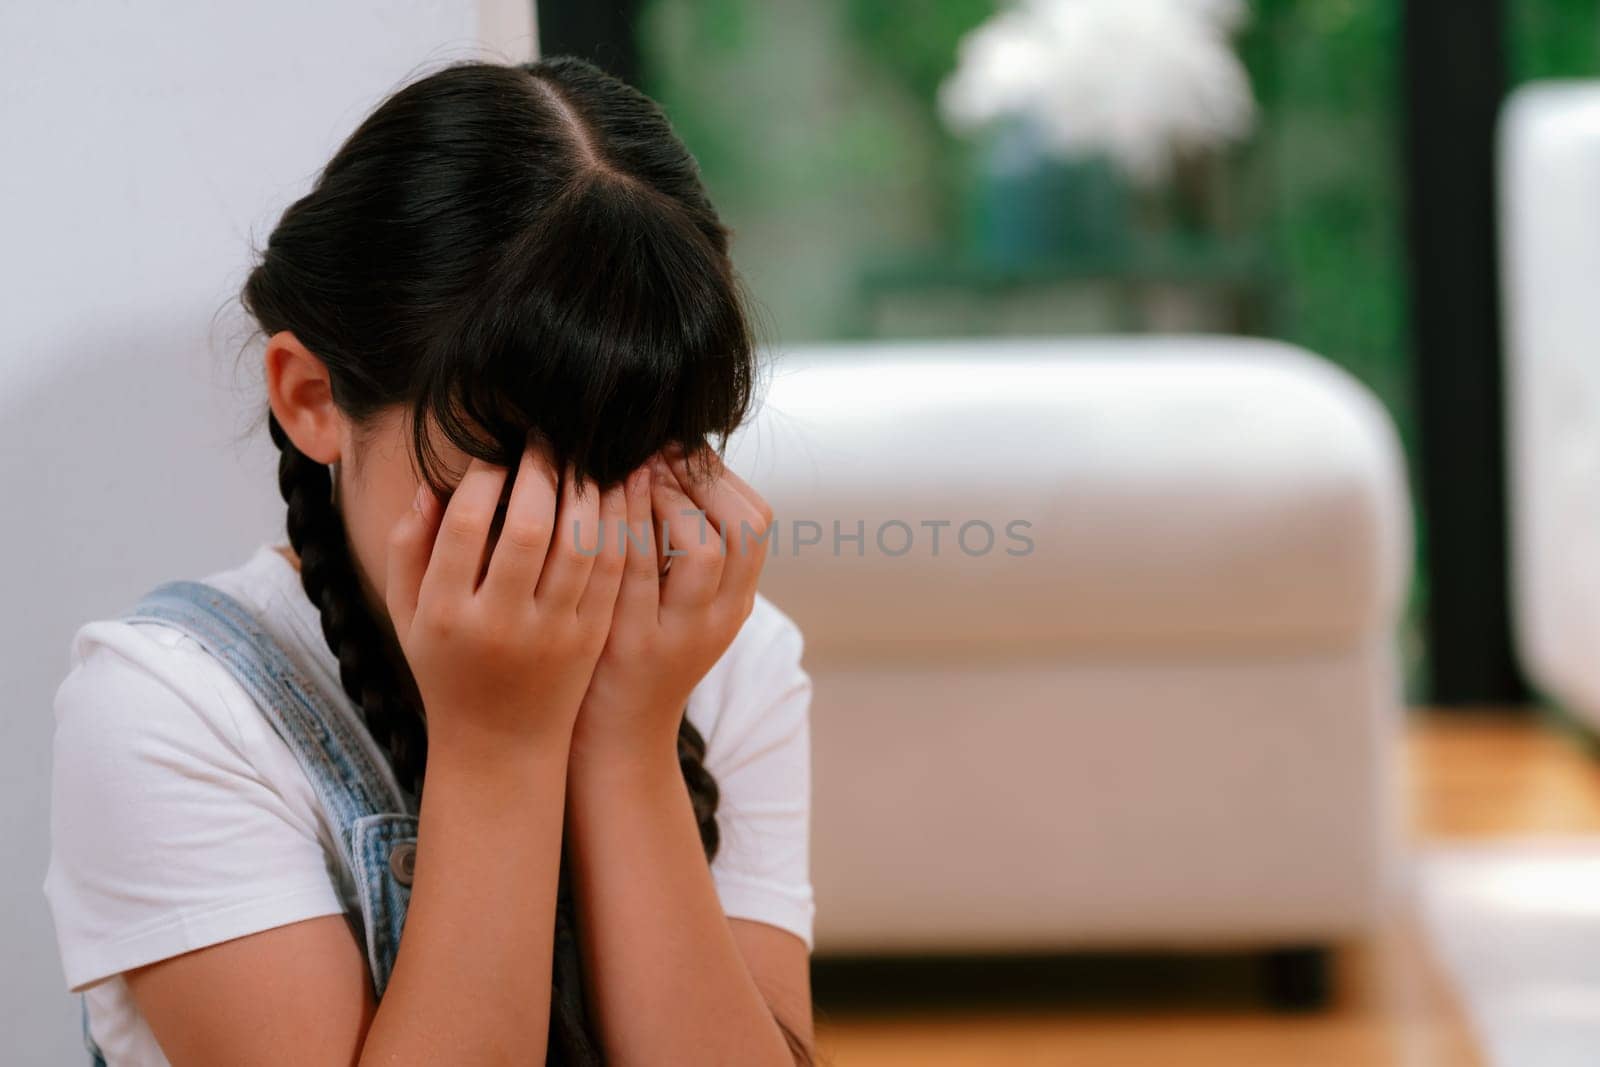 Sad little girl sitting alone in living room crying, feeling lonely. Young girl experiencing social isolation punishment or neglect from parent led to anxiety and traumatic in childhood. Synchronos